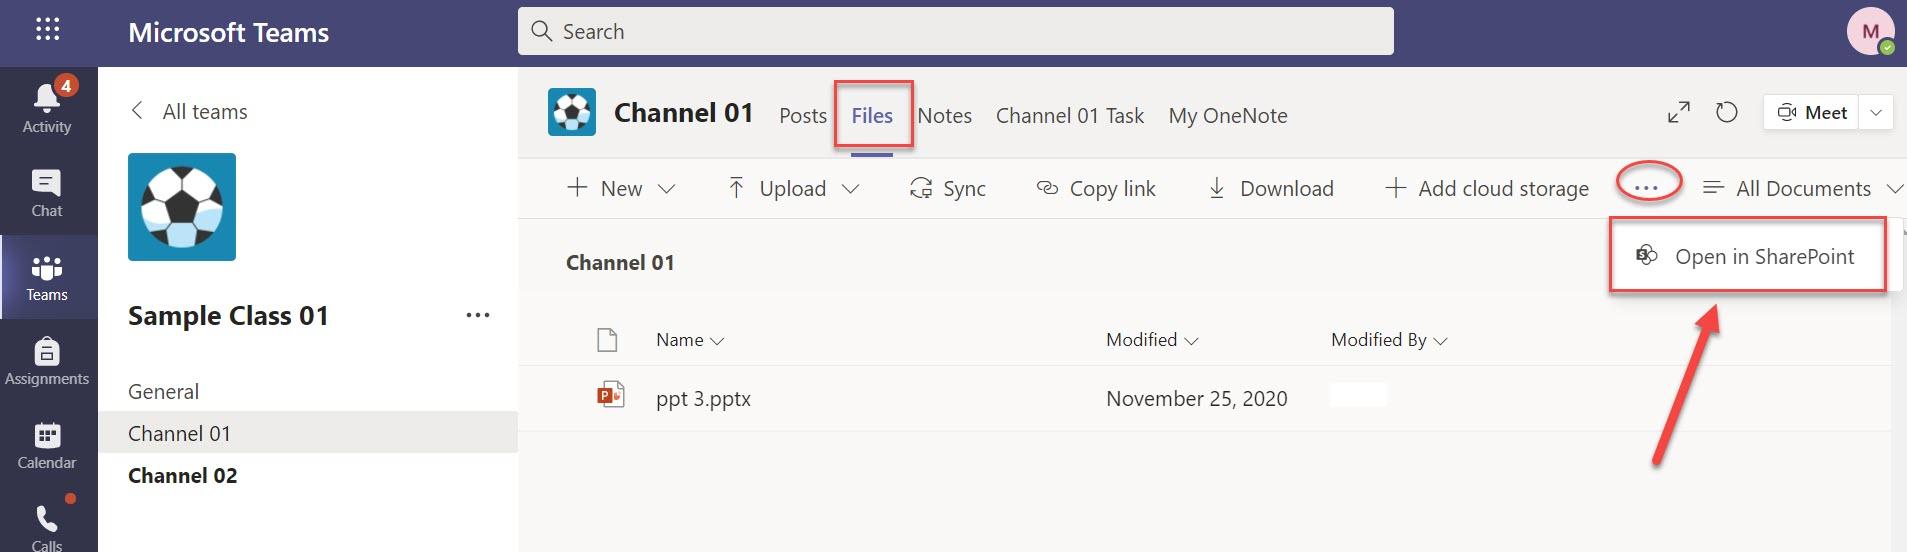 how to recover google classroom assignment